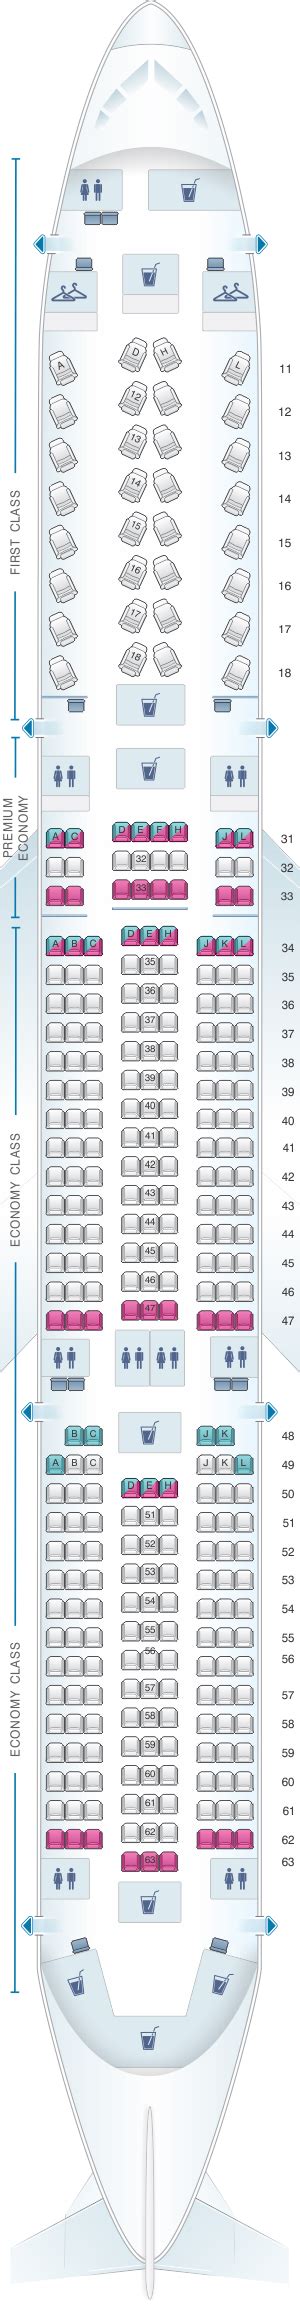 Airbus A350 900 Seat Map Delta Image To U